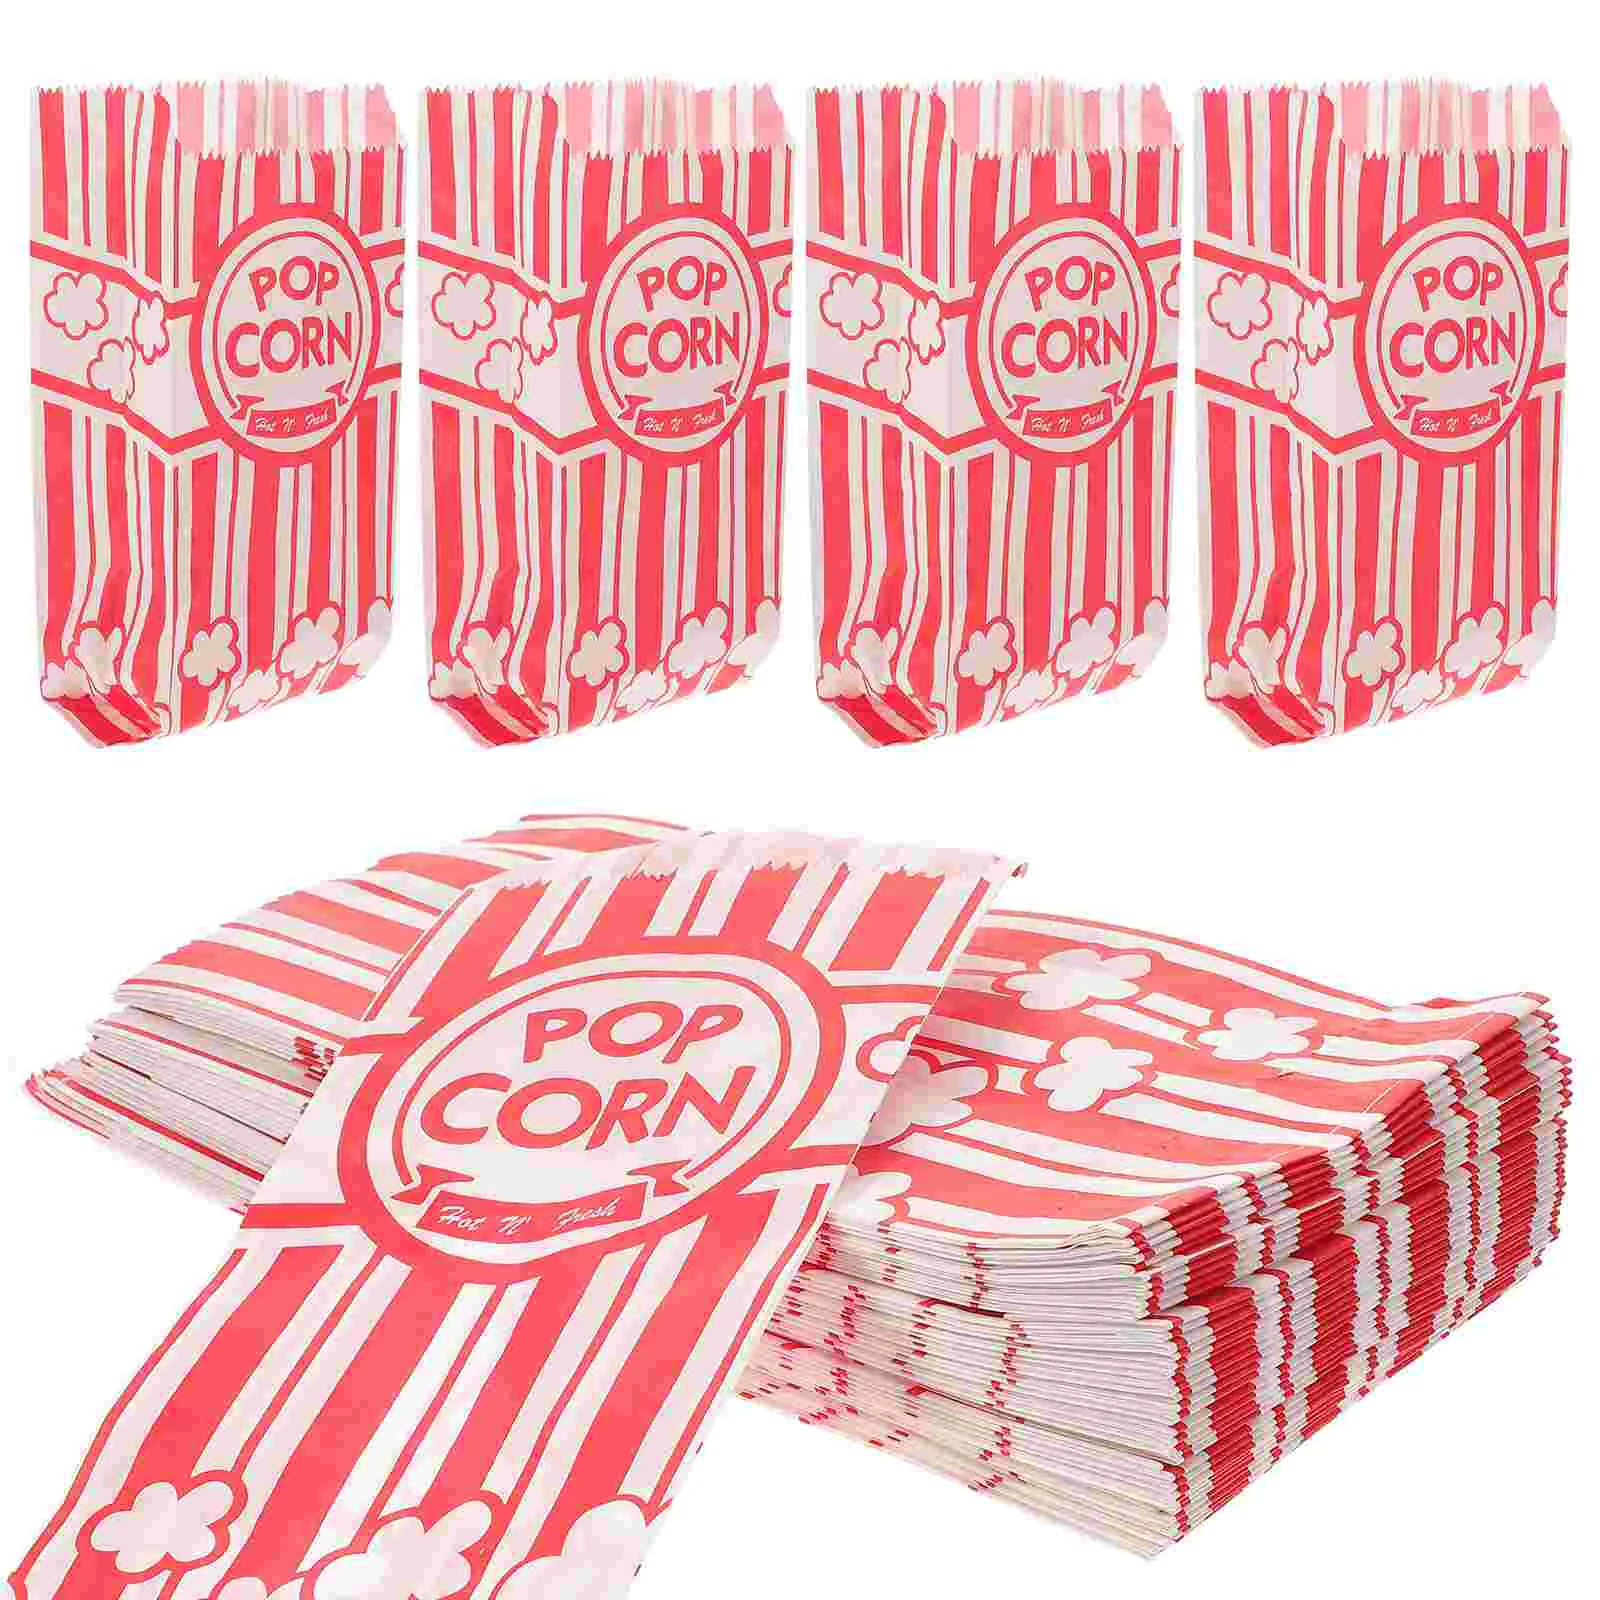 

50 Pcs Popcorn Paper Bag Portable Holder Mini Bags Candy Container Holders Individual Packets Snack Accessory